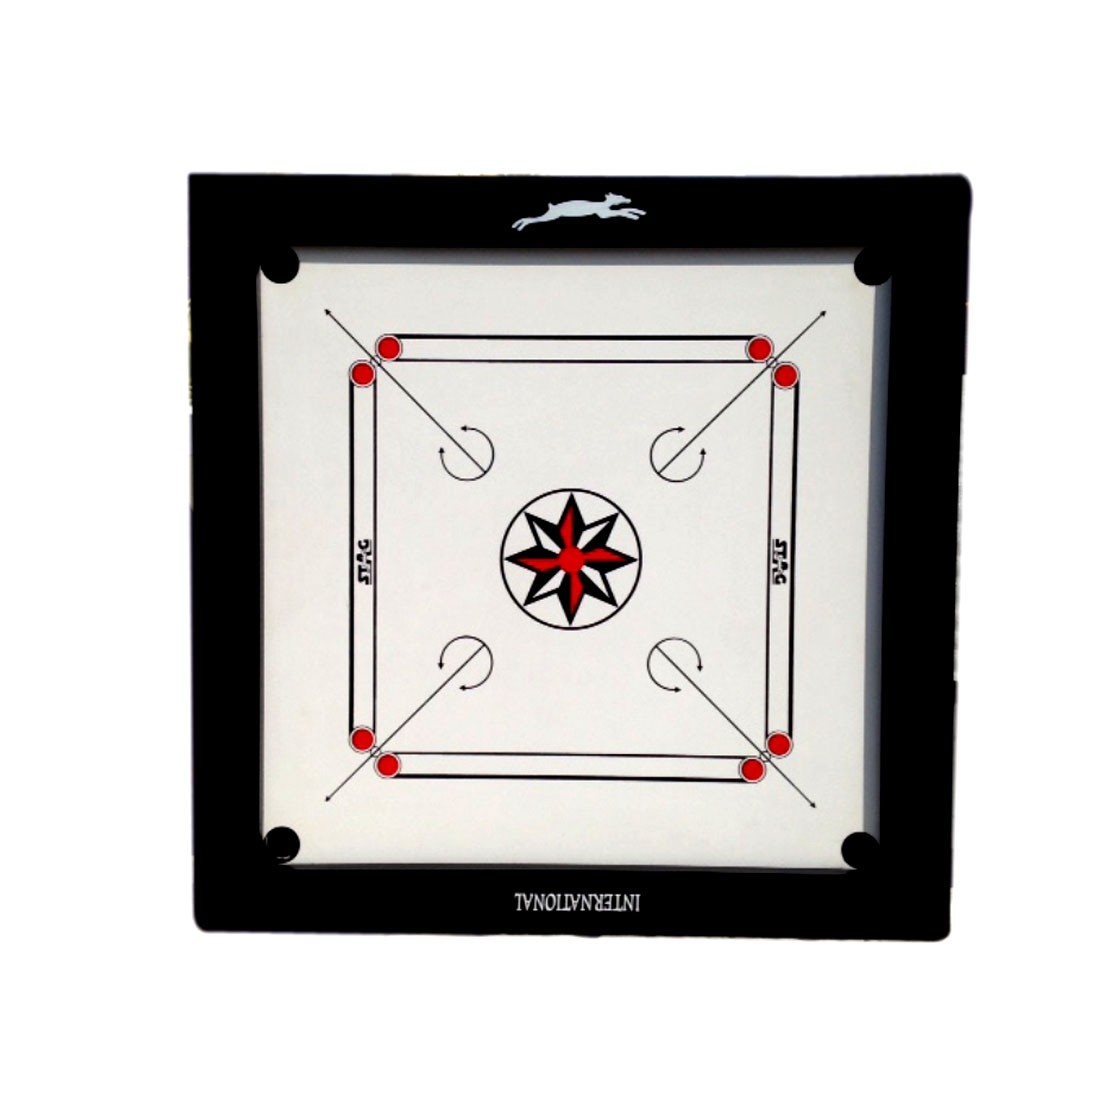 STAG CARROM BOARD INT. 3" BORDER 12MM Prelaminated Particle Board WITH WHEELS